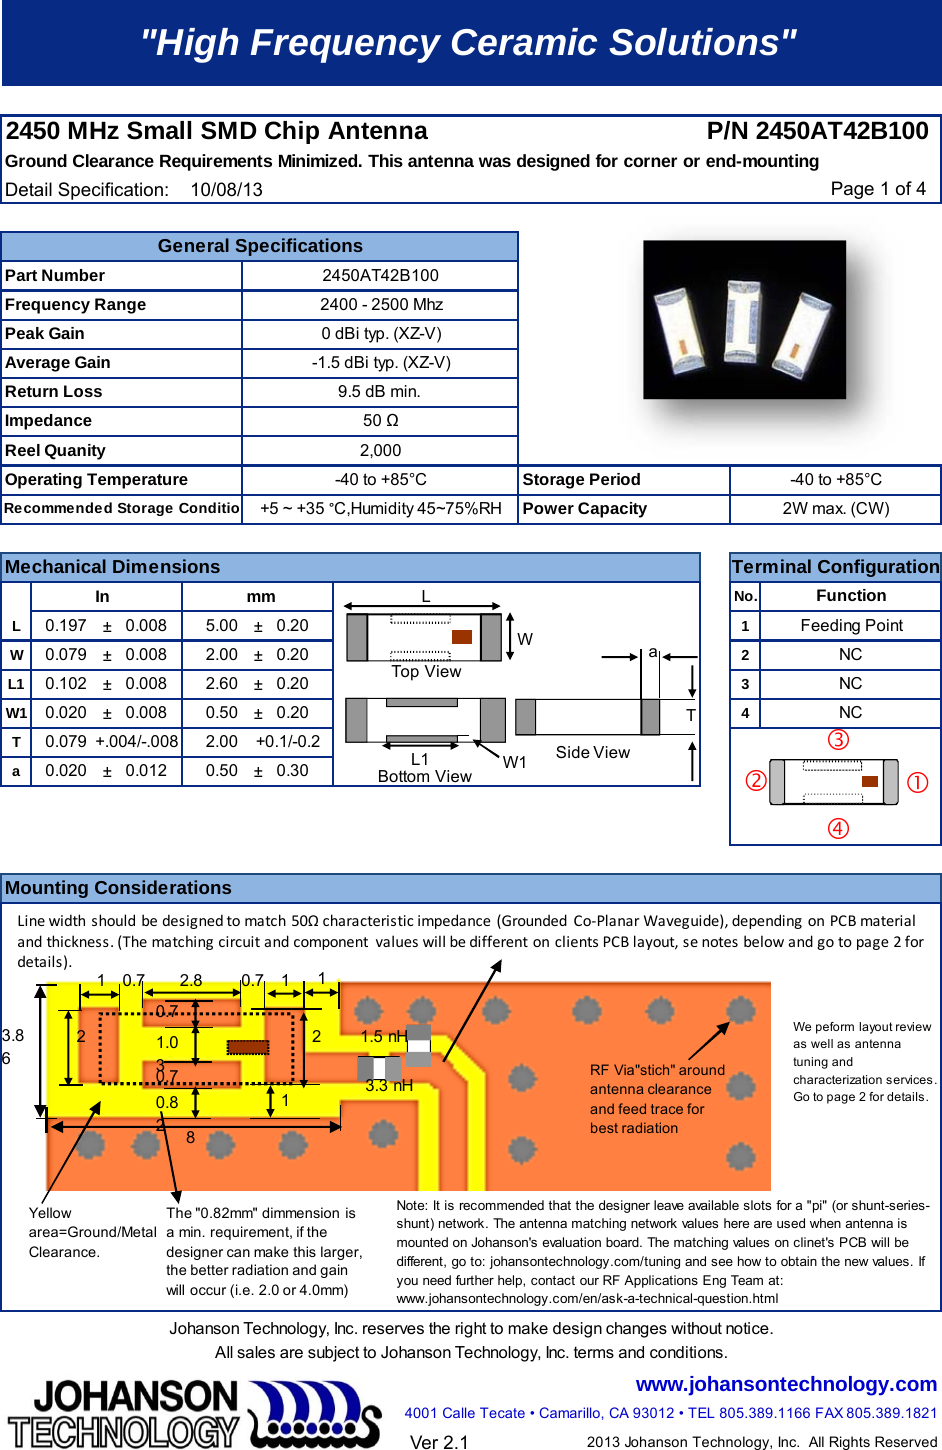 2450 MHz Small SMD Chip Antenna P/N 2450AT42B100 Ground Clearance Requirements Minimized. This antenna was designed for corner or end-mountingDetail Specification:    10/08/13 Page 1 of 4  In mmNo.L±±1W±±2L1±±3W1±±4Ta±±Johanson Technology, Inc. reserves the right to make design changes without notice.All sales are subject to Johanson Technology, Inc. terms and conditions.www.johansontechnology.com4001 Calle Tecate • Camarillo, CA 93012 • TEL 805.389.1166 FAX 805.389.1821Ver 2.12013 Johanson Technology, Inc.  All Rights ReservedNote: It is recommended that the designer leave available slots for a &quot;pi&quot; (or shunt-series-shunt) network. The antenna matching network values here are used when antenna is mounted on Johanson&apos;s evaluation board. The matching values on clinet&apos;s PCB will be different, go to: johansontechnology.com/tuning and see how to obtain the new values. If you need further help, contact our RF Applications Eng Team at: www.johansontechnology.com/en/ask-a-technical-question.html We peform layout review as well as antenna tuning and characterization services. Go to page 2 for details.General Specifications-40 to +85°C2W max. (CW)2,00050 9.5 dB min. -1.5 dBi typ. (XZ-V)0 dBi typ. (XZ-V)2400 - 2500 Mhz0.020 0.012 0.50 0.300.079 2.00+.004/-.008 +0.1/-0.20.008 0.200.500.008 0.202.60 0.20+5 ~ +35 °C,Humidity 45~75%RH-40 to +85°C&quot;High Frequency Ceramic Solutions&quot;0.202.000.0200.102 0.0080.0080.1970.0795.00NCNCNC2450AT42B100Mounting ConsiderationsPart NumberFrequency RangePeak GainAverage GainReturn LossImpedanceReel QuanityPower CapacityFunctionMechanical Dimensions Terminal ConfigurationFeeding PointOperating TemperatureRecommended Storage ConditionStorage PeriodaTW1L1WL2.8 10.7110.71.030.70.820.712283.863.3 nH1.5 nHLinewidthshouldbedesignedtomatch50Ωcharacteristicimpedance(GroundedCo‐PlanarWaveguide),dependingonPCBmaterialandthickness.(Thematchingcircuitandcomponentvalueswillbedifferent onclients PCBlayout, senotesbelowandgotopage2fordetails).Top ViewBottom ViewSide ViewYellow area=Ground/Metal Clearance.The &quot;0.82mm&quot; dimmension is a min. requirement, if the designer can make this larger, the better radiation and gain will  occur (i.e. 2.0 or 4.0mm)RF Via&quot;stich&quot; around antenna clearance and feed trace for best radiation